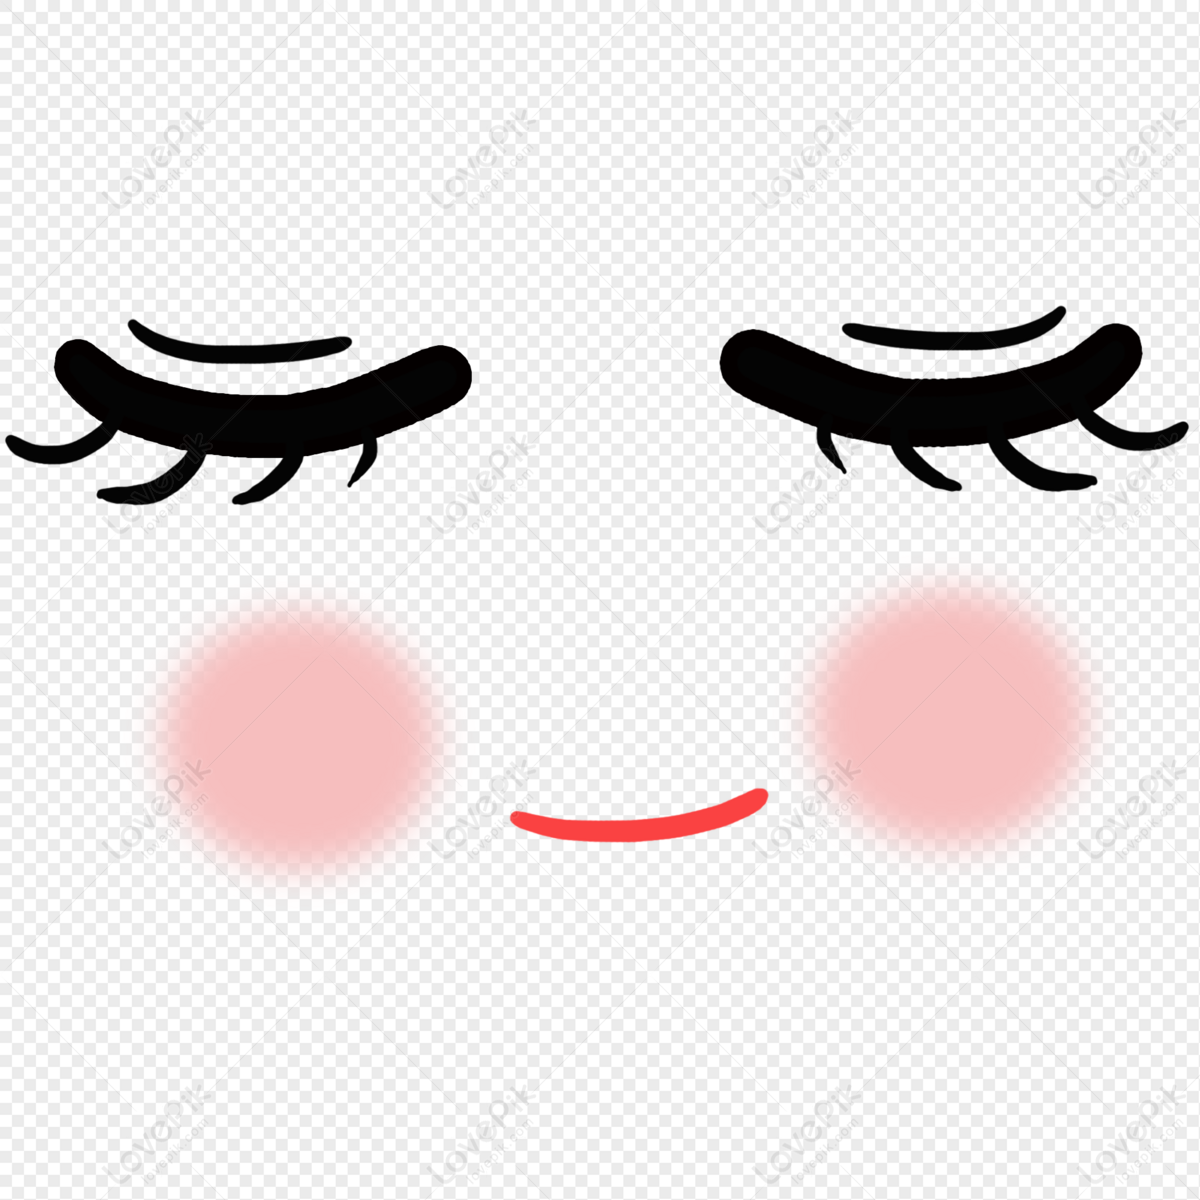 Expression PNG Image Free Download And Clipart Image For Free Download -  Lovepik | 401057361